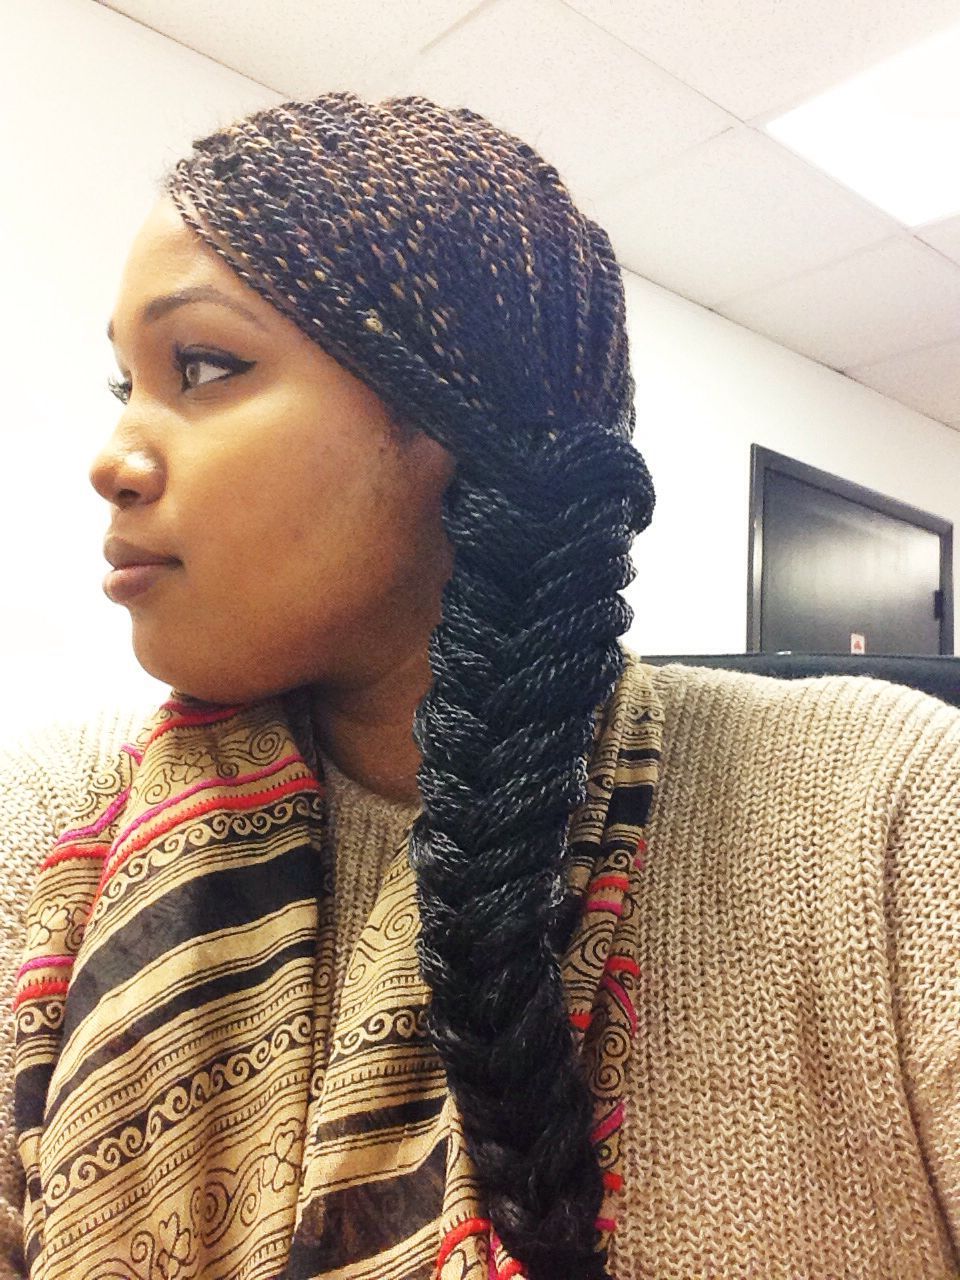 Most Recent Micro Braids Hairstyles In Side Fishtail Braid Regarding Senegalese Twists, Fishtail Braid Protective Styles Micro (View 3 of 20)